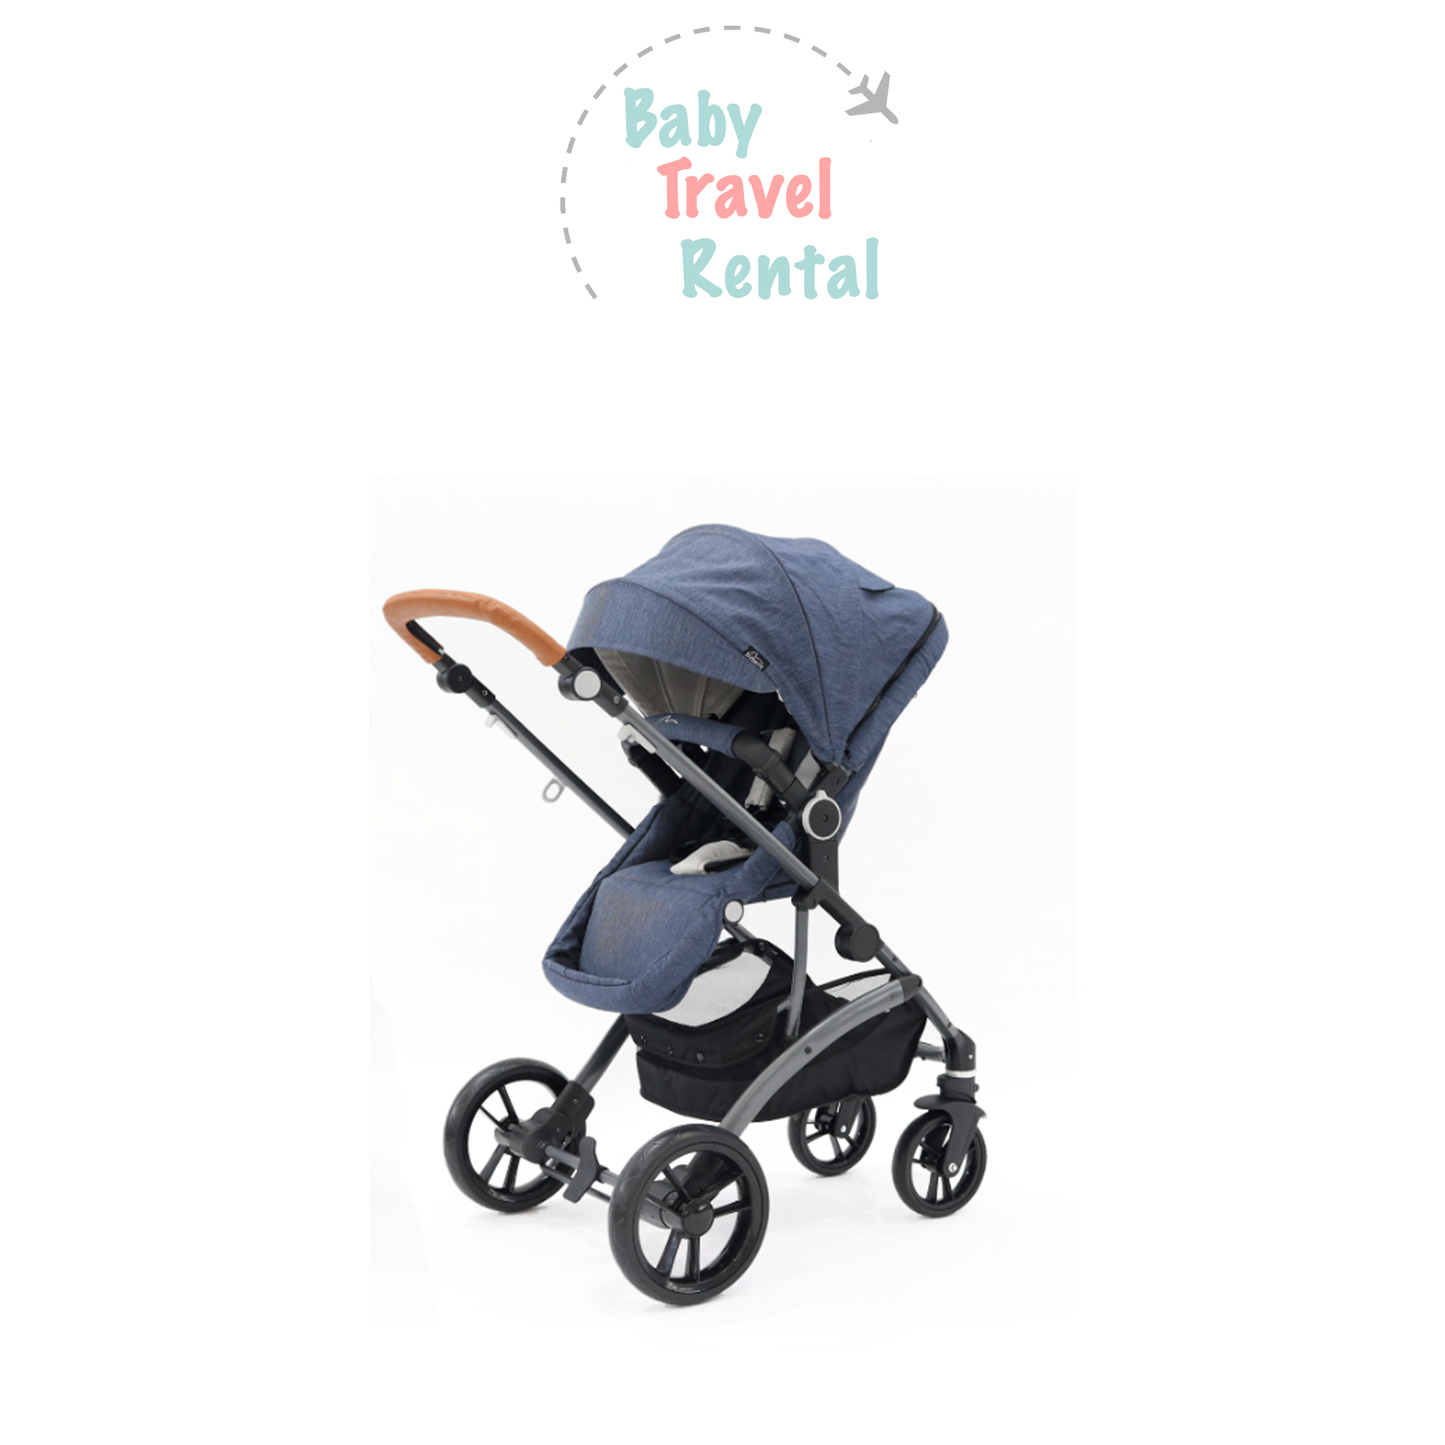 Pushchair, pram and travel cot hire in Tenerife